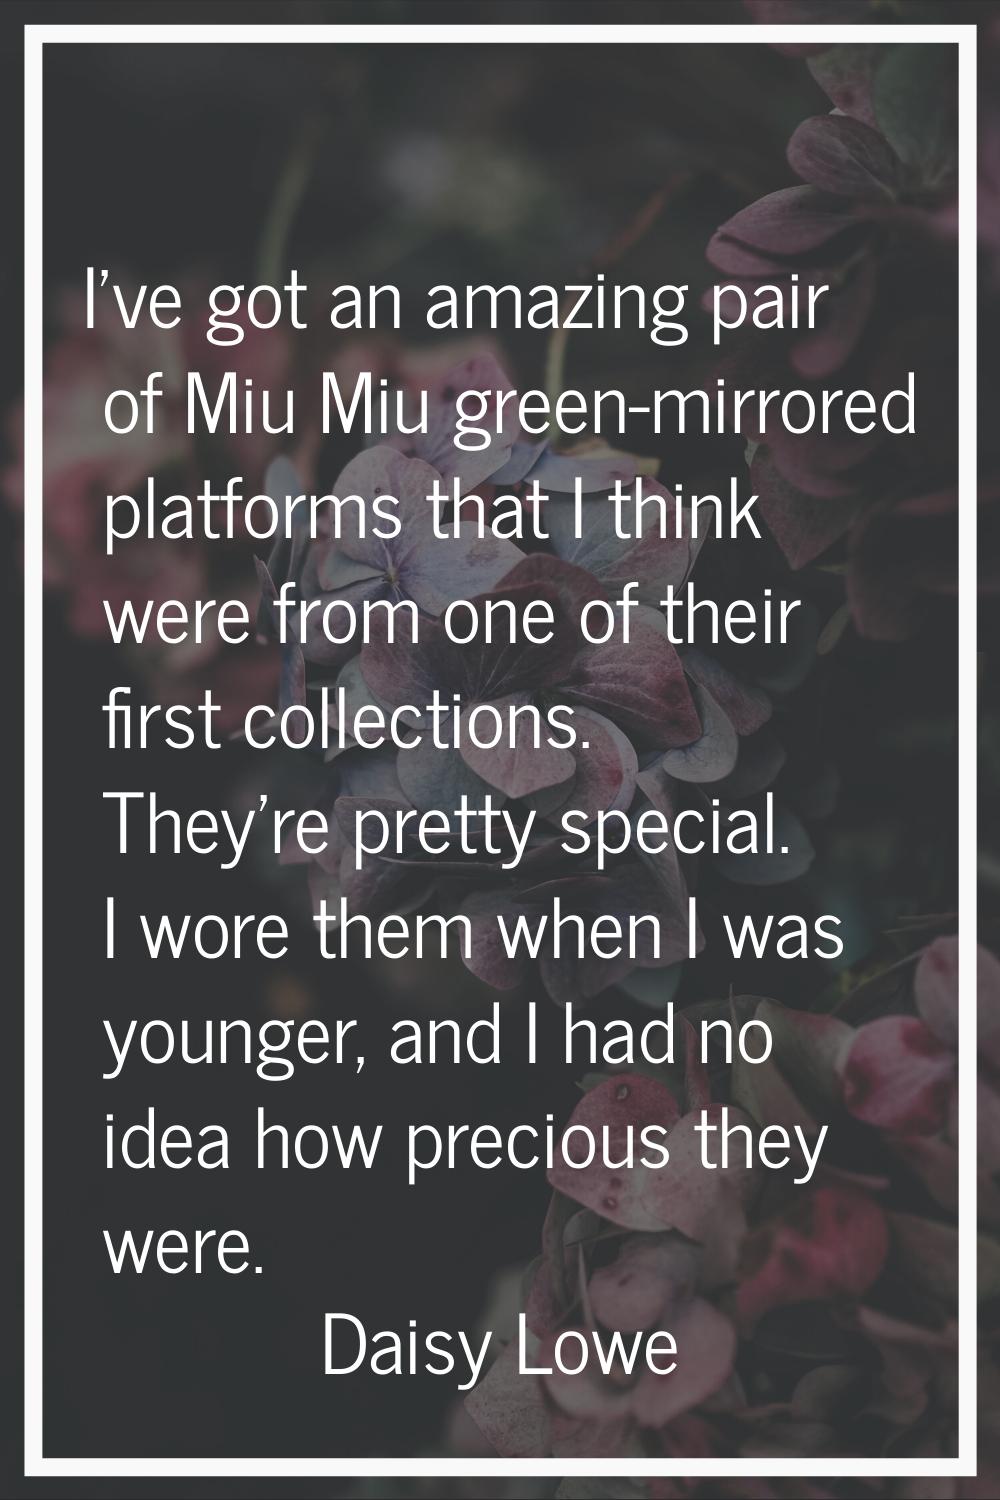 I've got an amazing pair of Miu Miu green-mirrored platforms that I think were from one of their fi